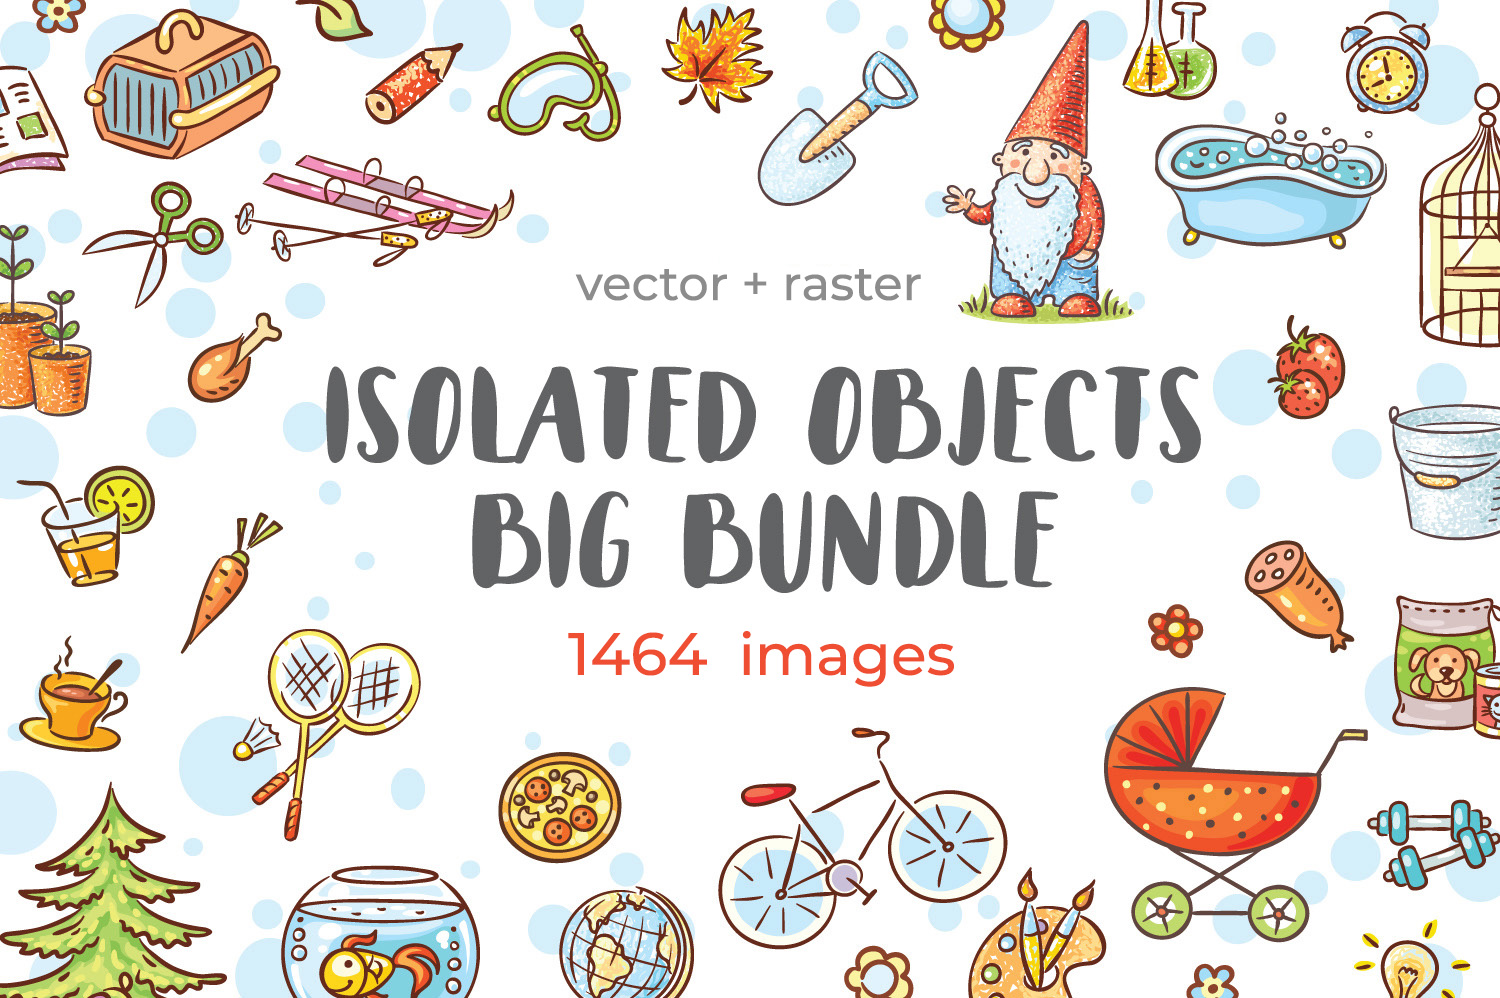 Bundle vector stock illustration. Set of isolated cartoon objects clipart